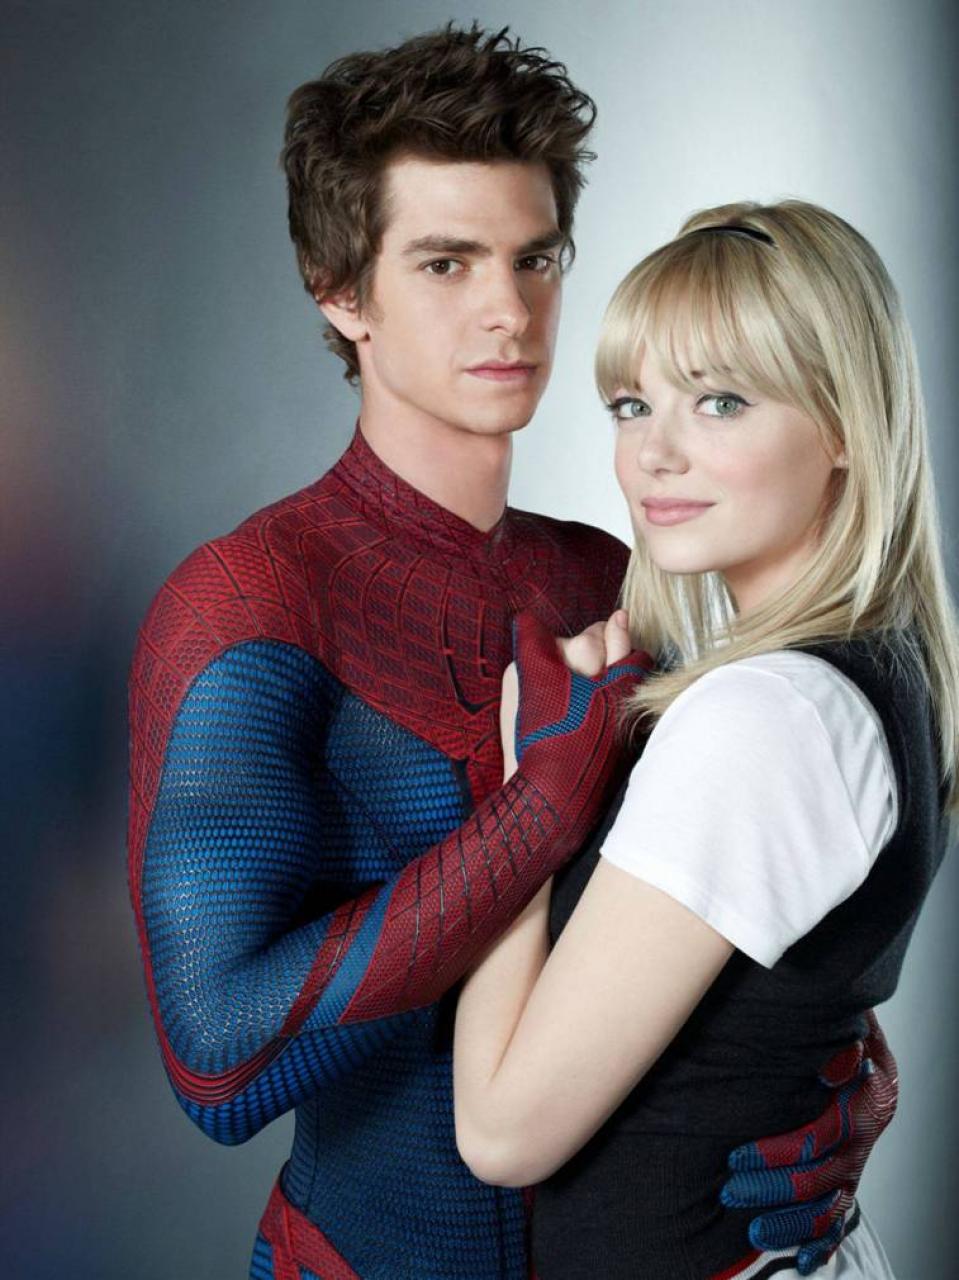 New Image Of THE AMAZING SPIDER MAN, Headlining Emma Stone As Gwen Stacy. Rama's Screen